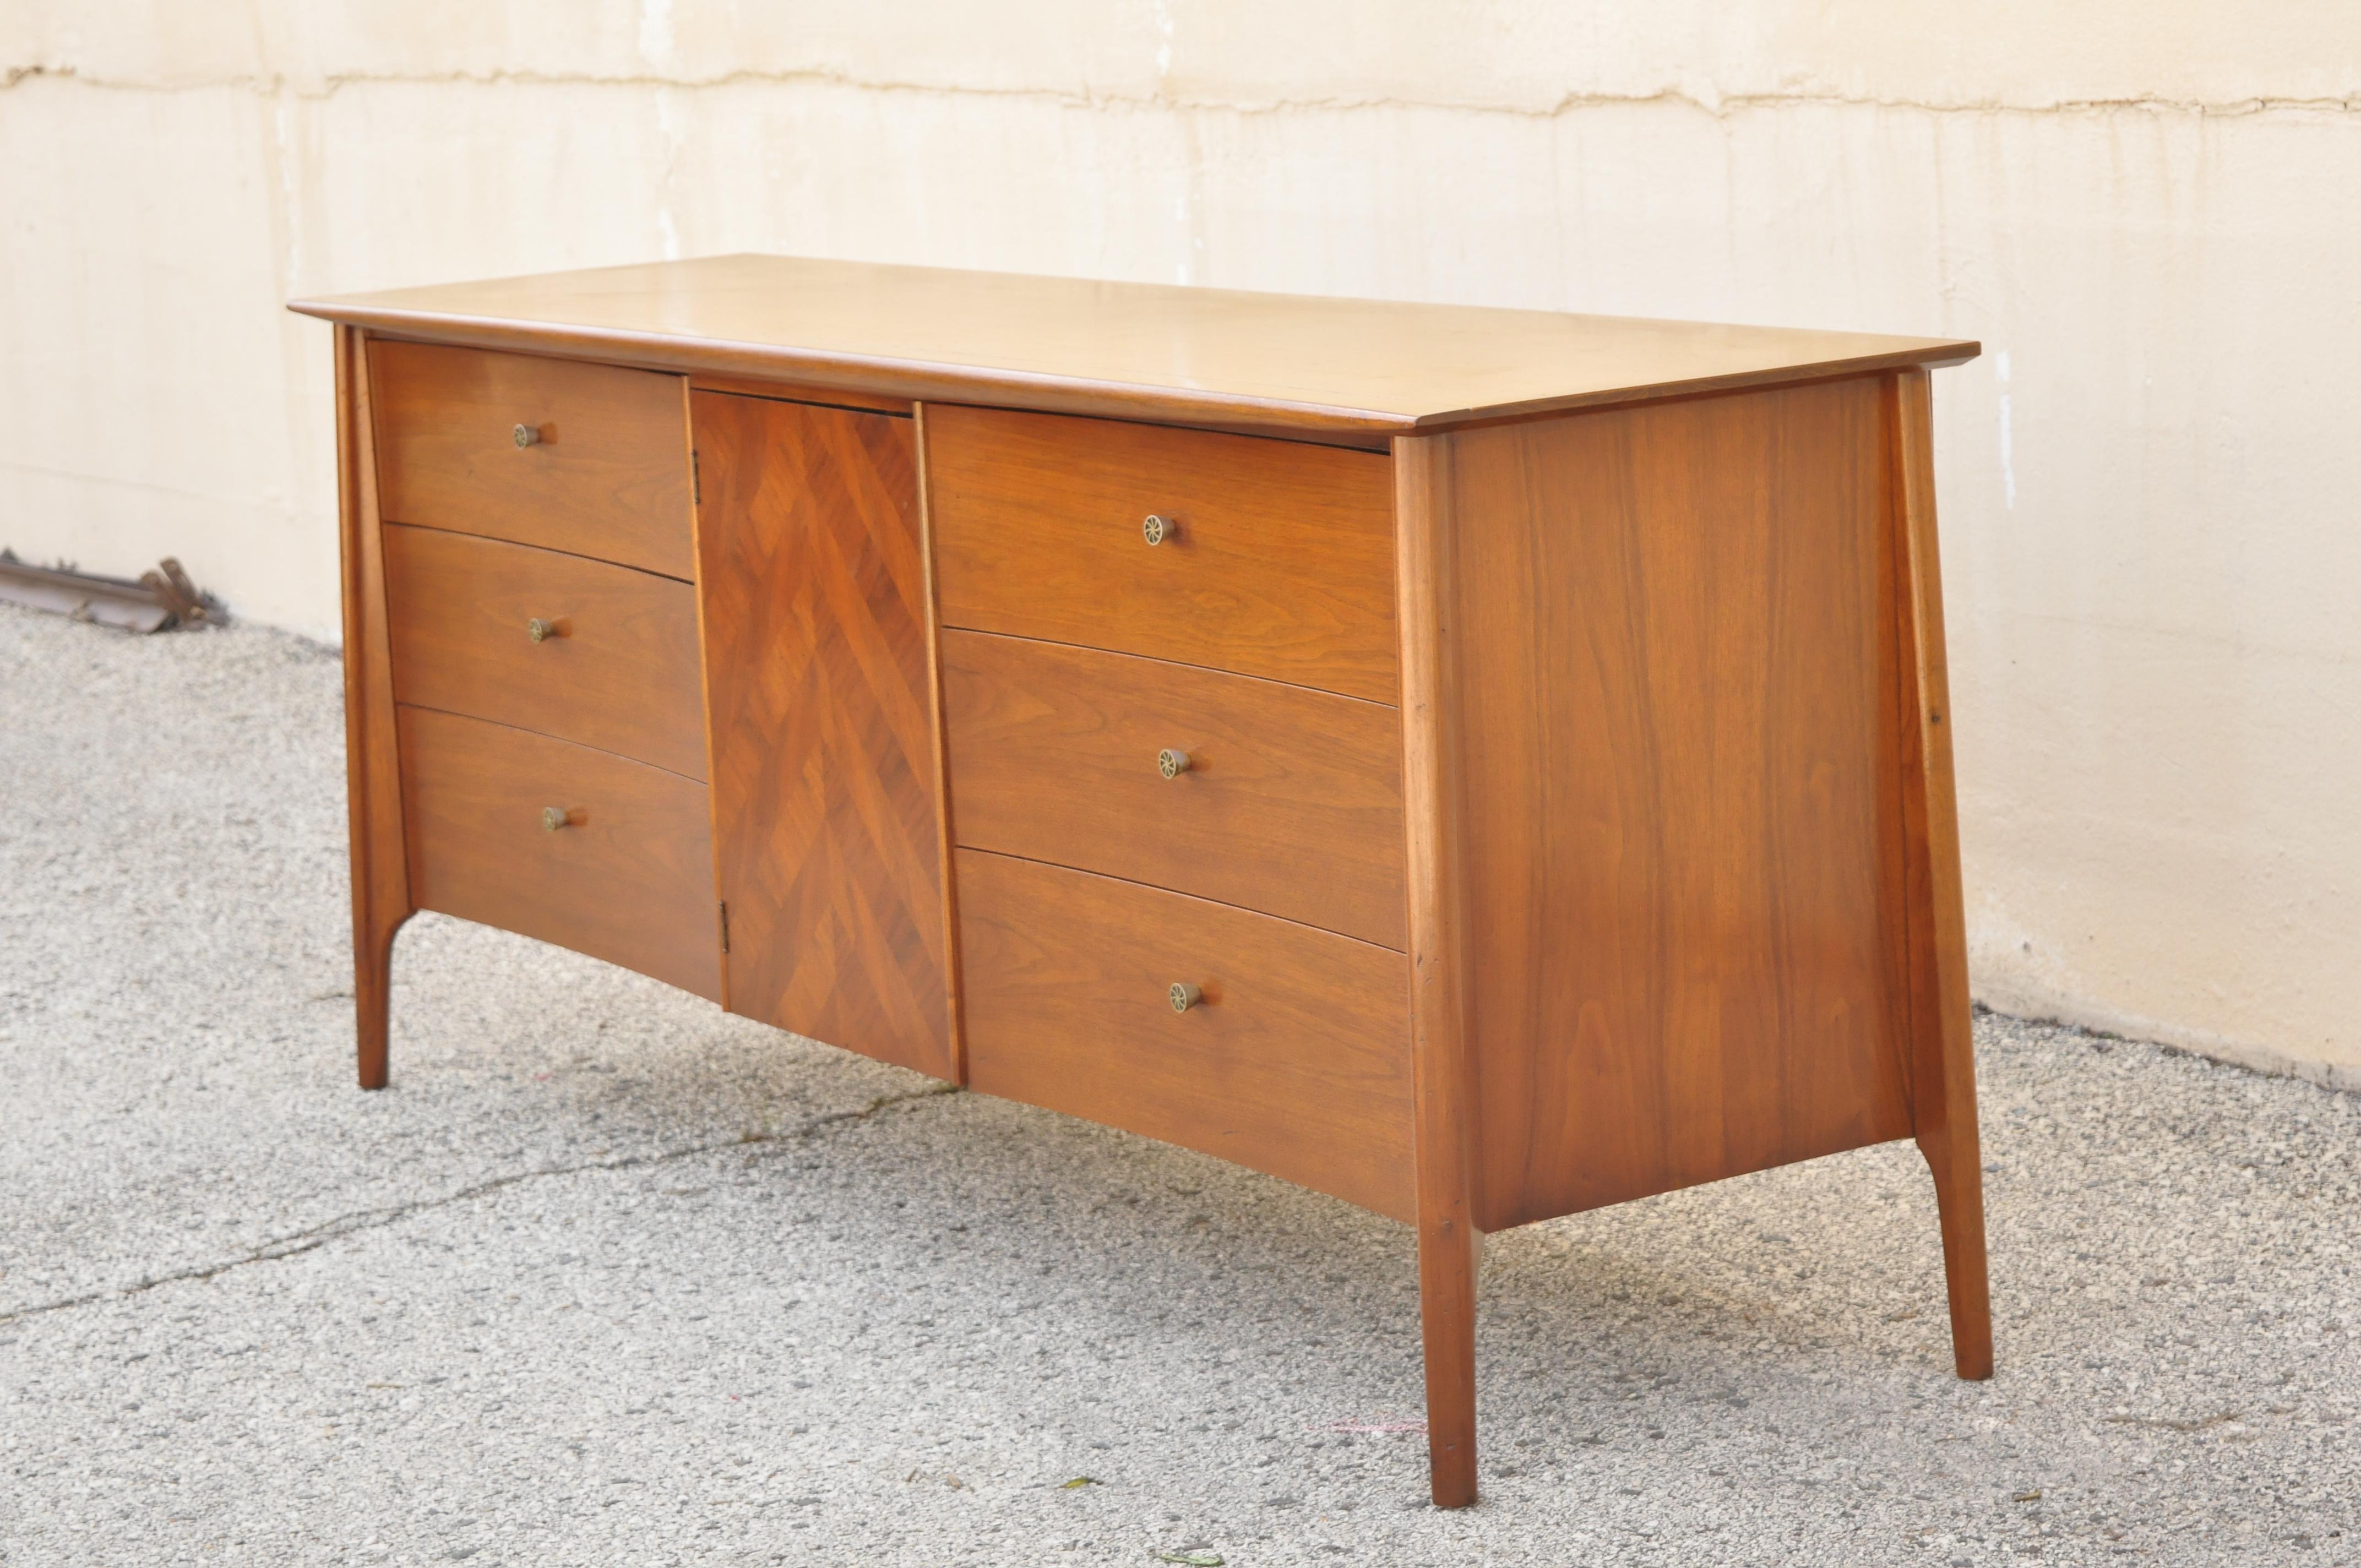 Vintage mid century sculpted walnut credenza cabinet dresser with marquetry inlay door. Item features enameled drawer pulls, curved drawer fronts, marquetry inlay door front, beautiful wood grain, 8 dovetailed drawers, tapered legs, clean modernist